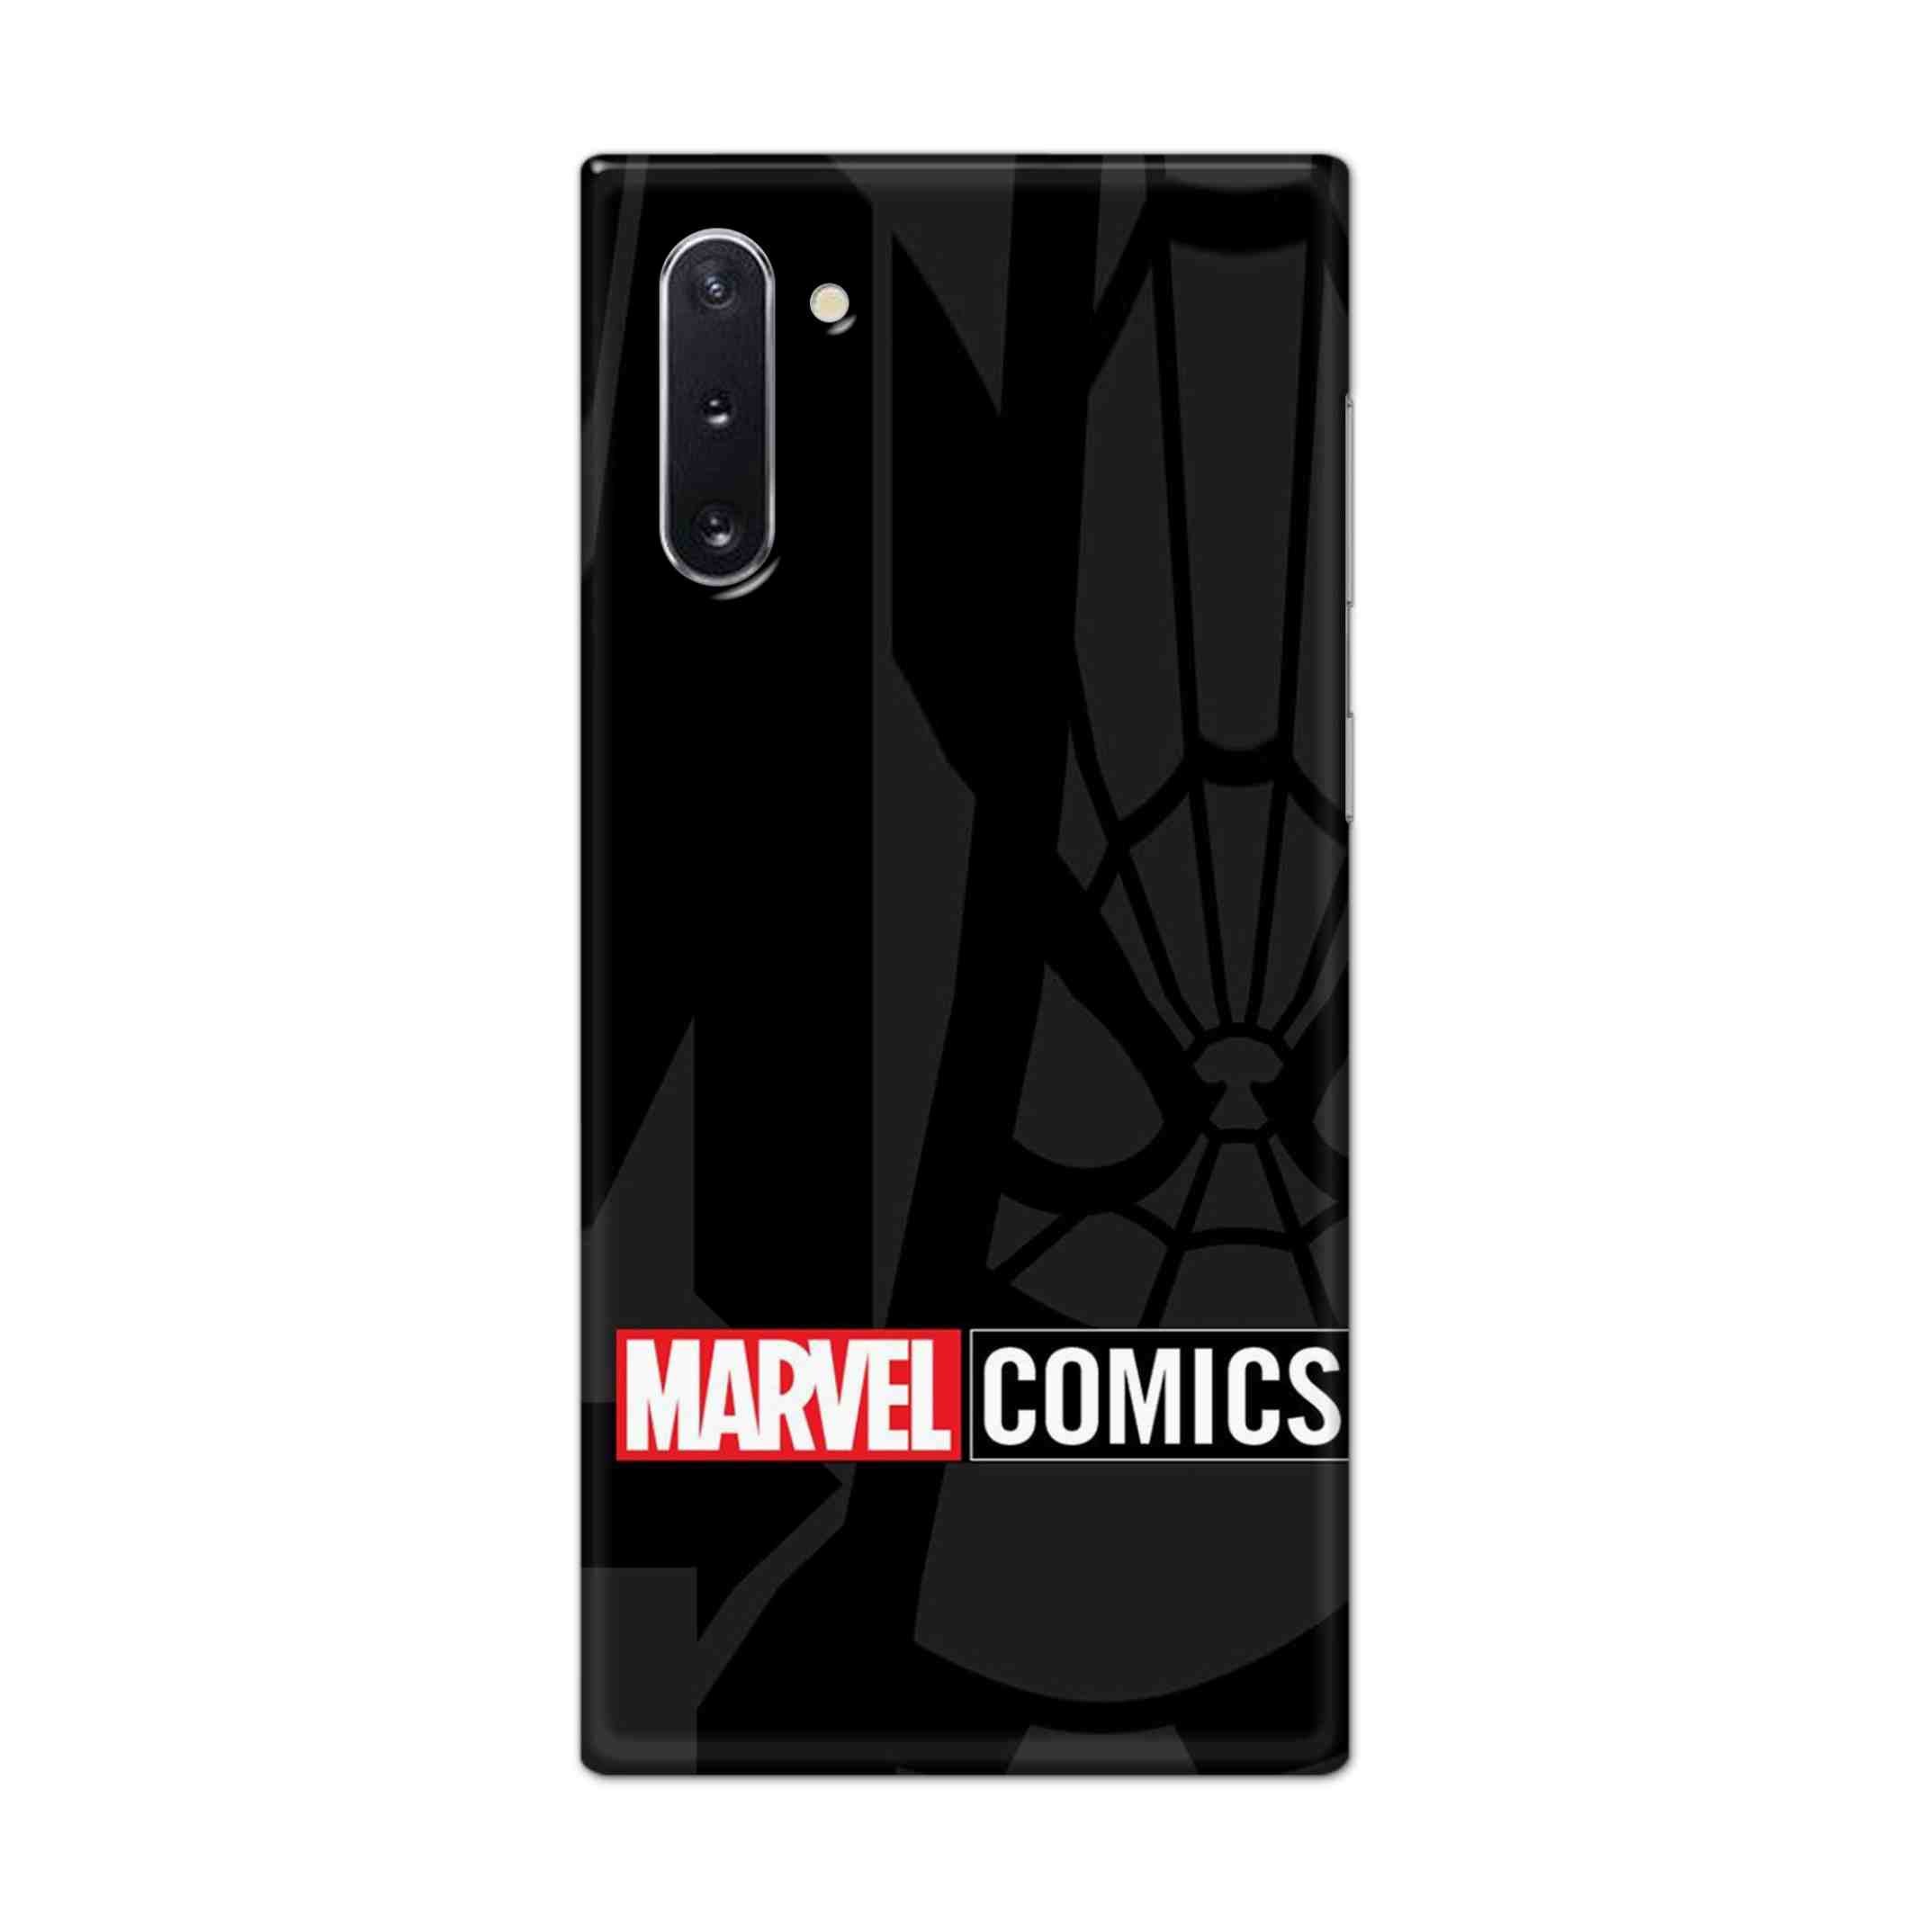 Buy Marvel Comics Hard Back Mobile Phone Case Cover For Samsung Galaxy Note 10 Online